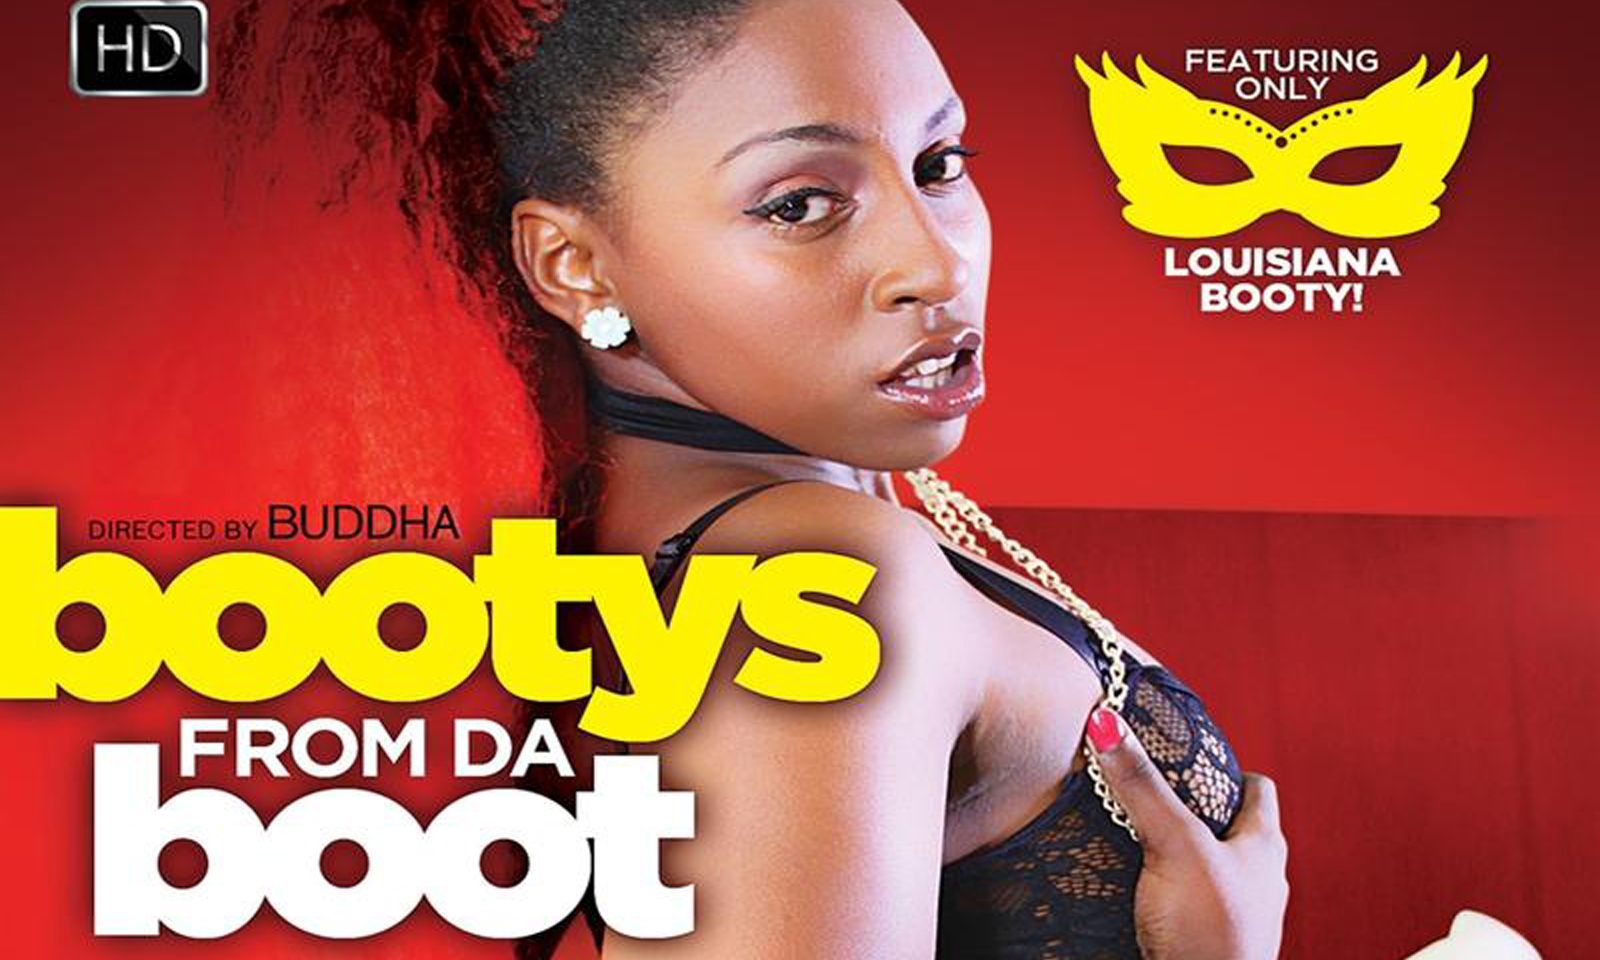 Buddha Bang Heads to Louisiana for Some ‘Bootys From Da Boot’